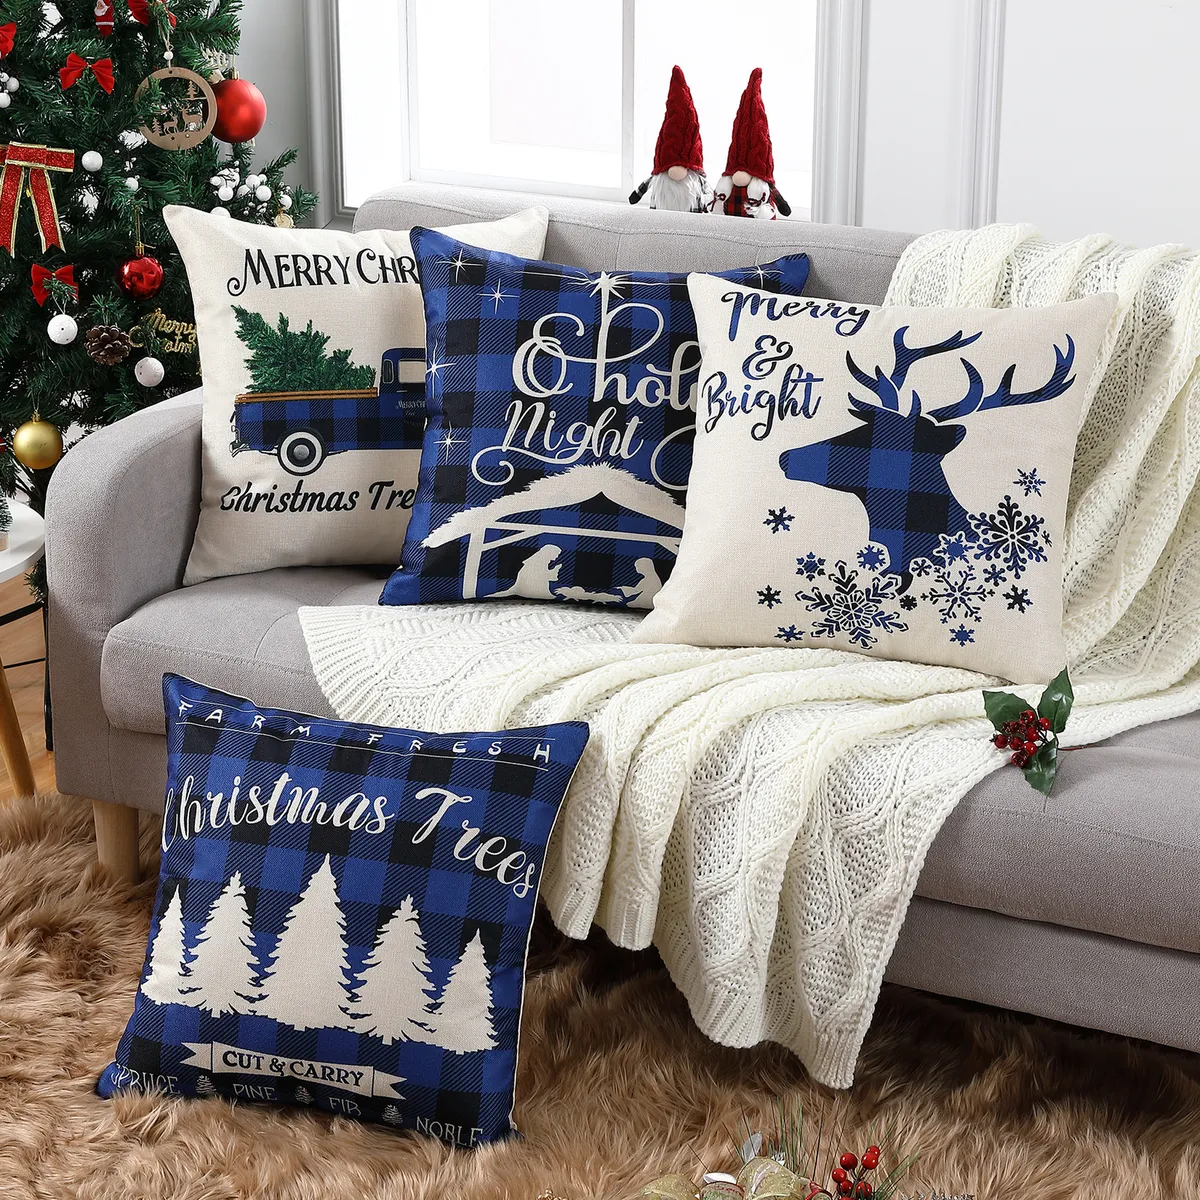 Blue Christmas Pillow Covers 18x18, Blue Christmas Decorations Winter  Holiday Outdoor Blue Christmas Throw Pillow Covers, Xmas Snowflake  Farmhouse